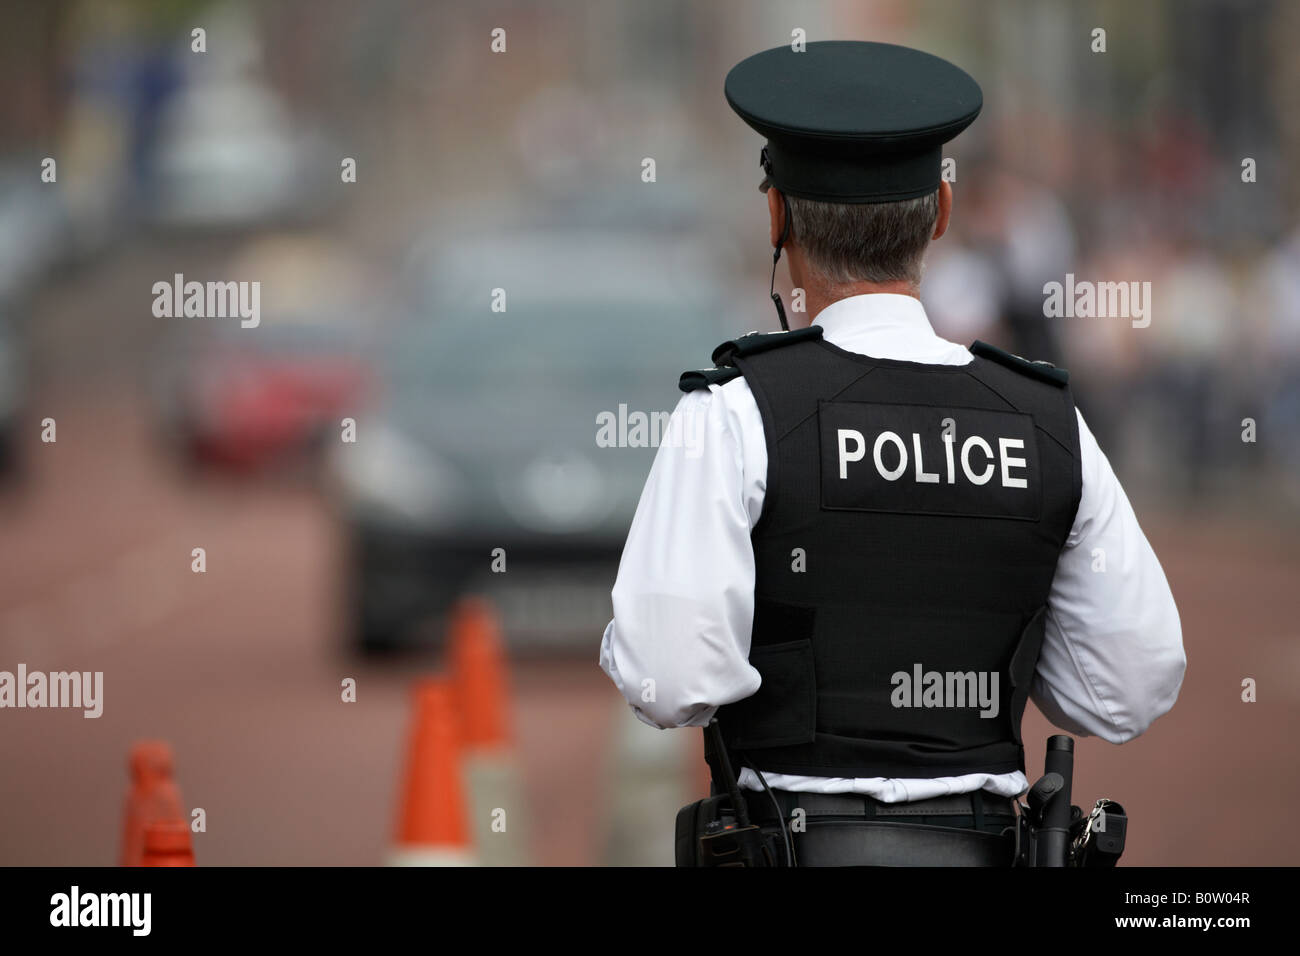 PSNI police service northern ireland officer sergeant standing watching traffic in coned off roadside area Stock Photo